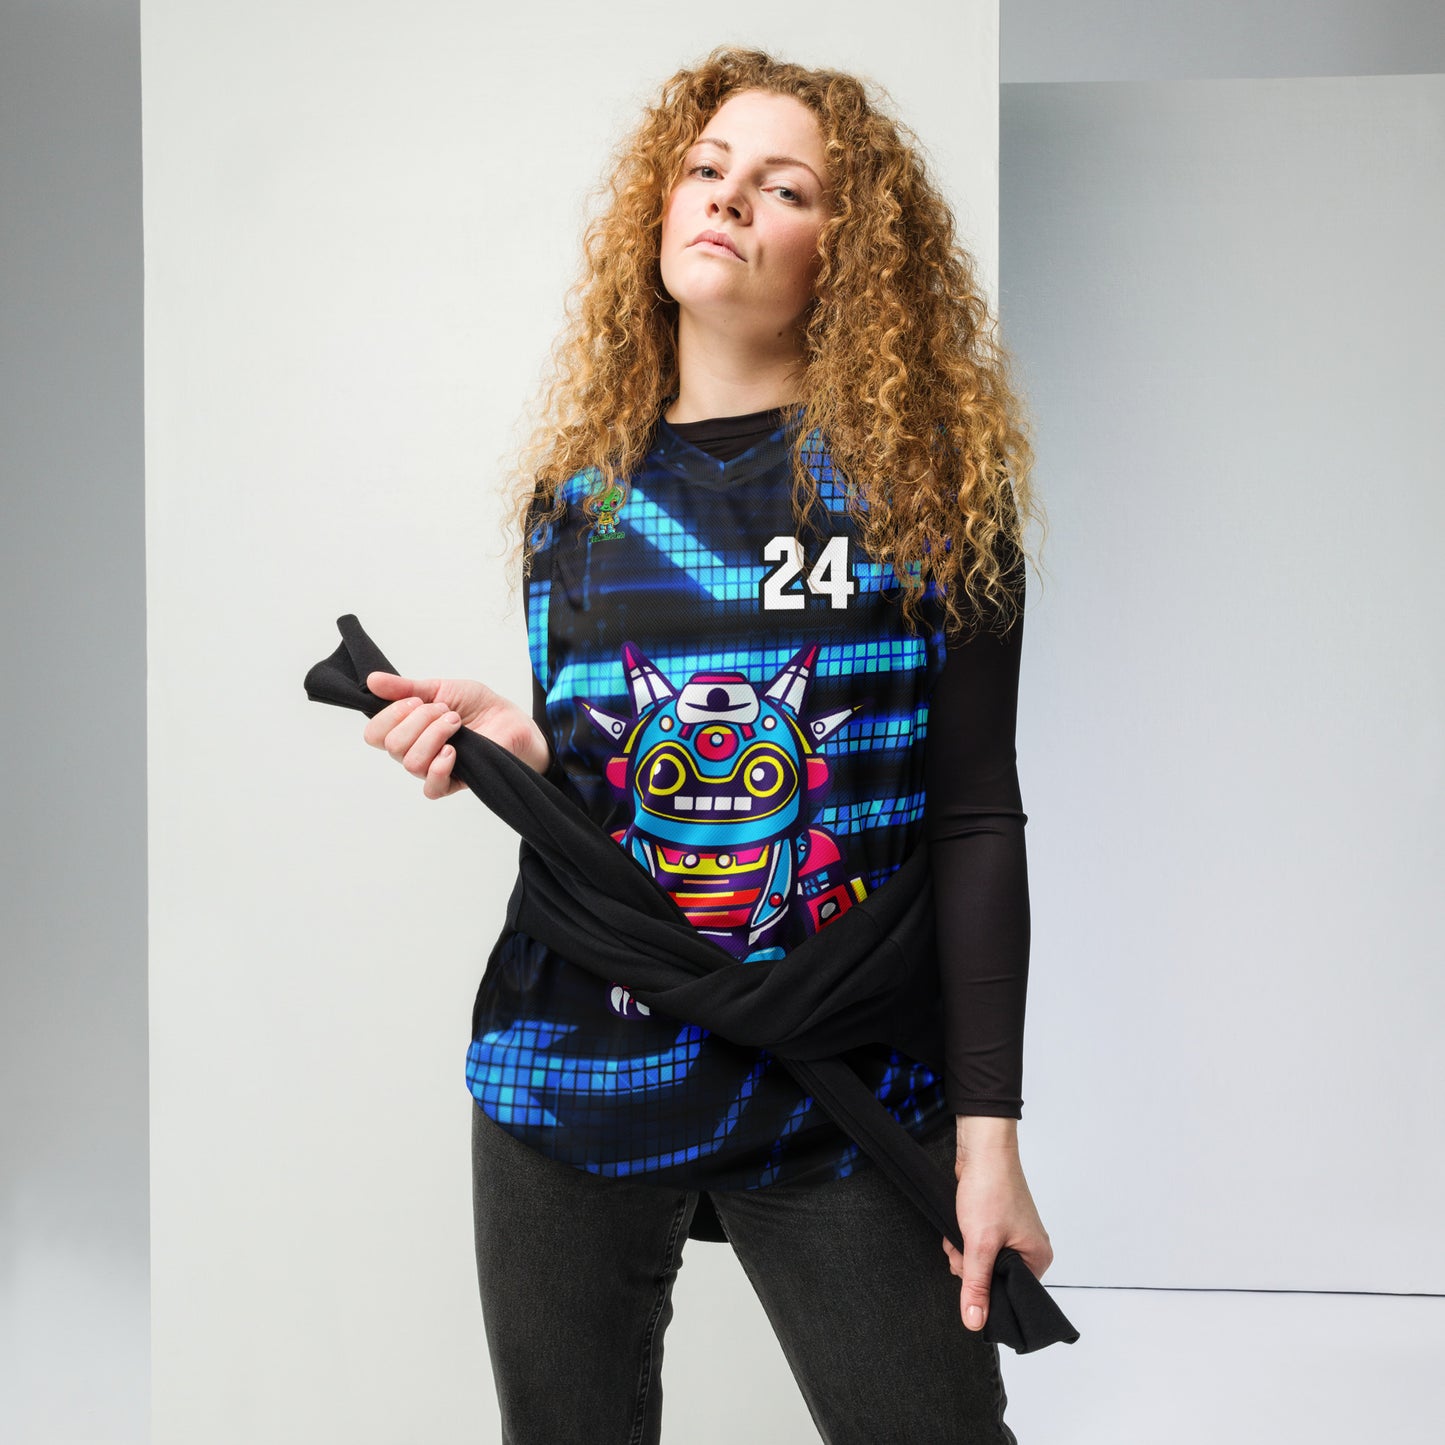 Techno Guardian - Recycled unisex basketball jersey - Digital Pulse Colorway